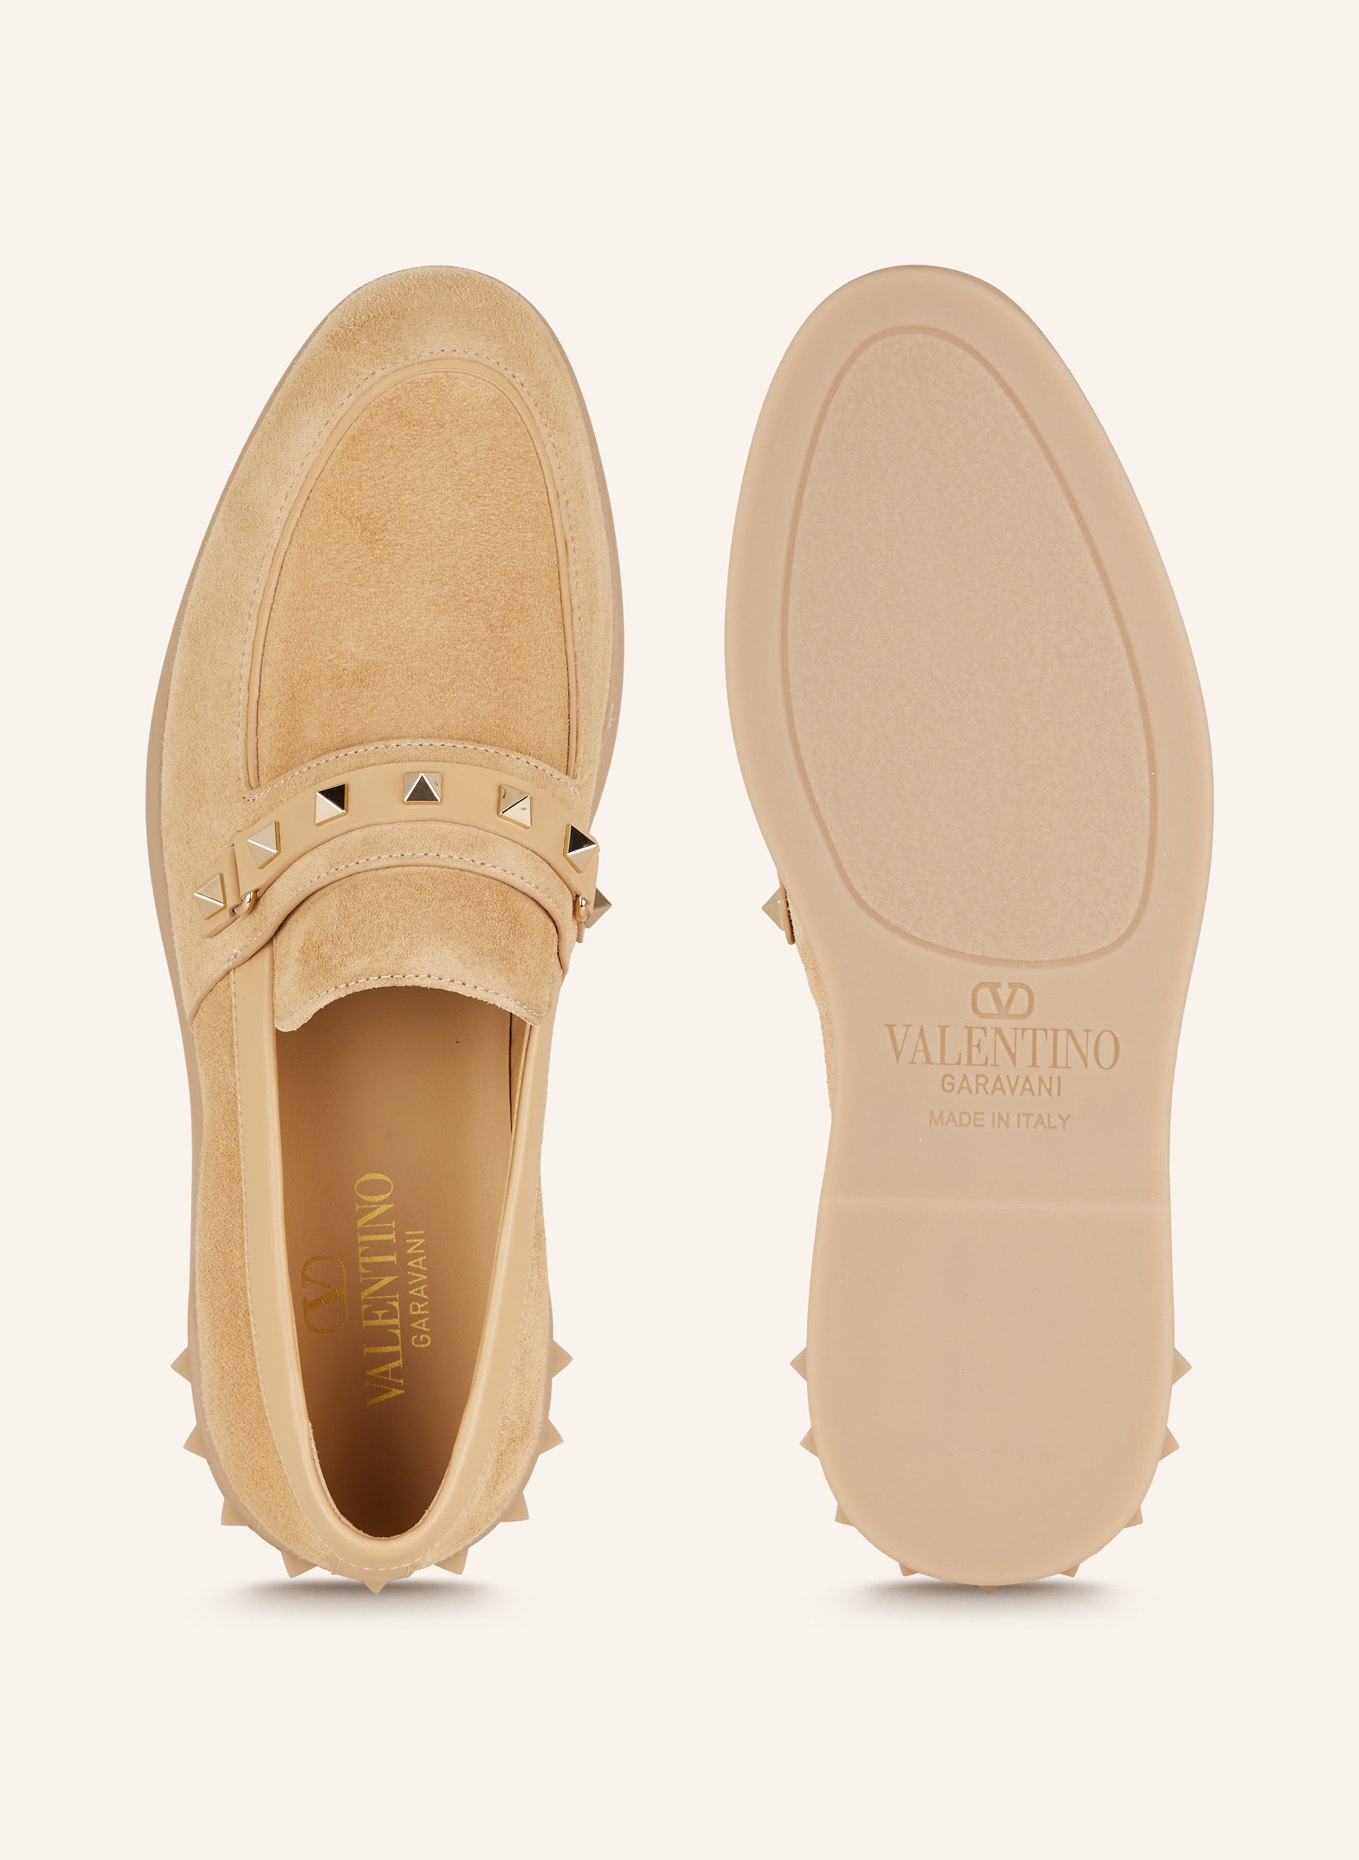 VALENTINO GARAVANI Loafers LEISURE FLOWS with rivets, Color: BEIGE (Image 5)